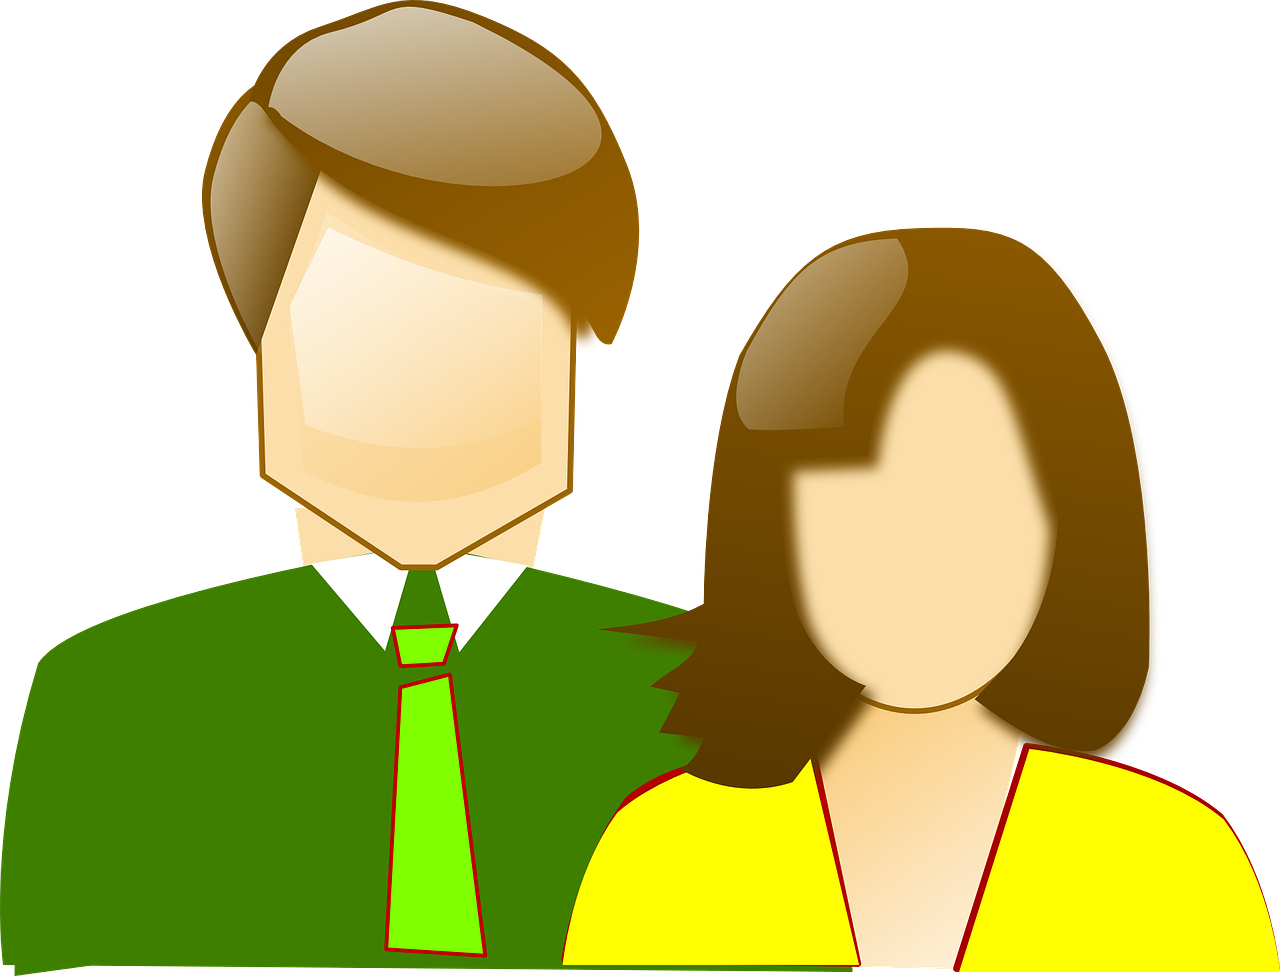 A Man And Woman In Green And Yellow